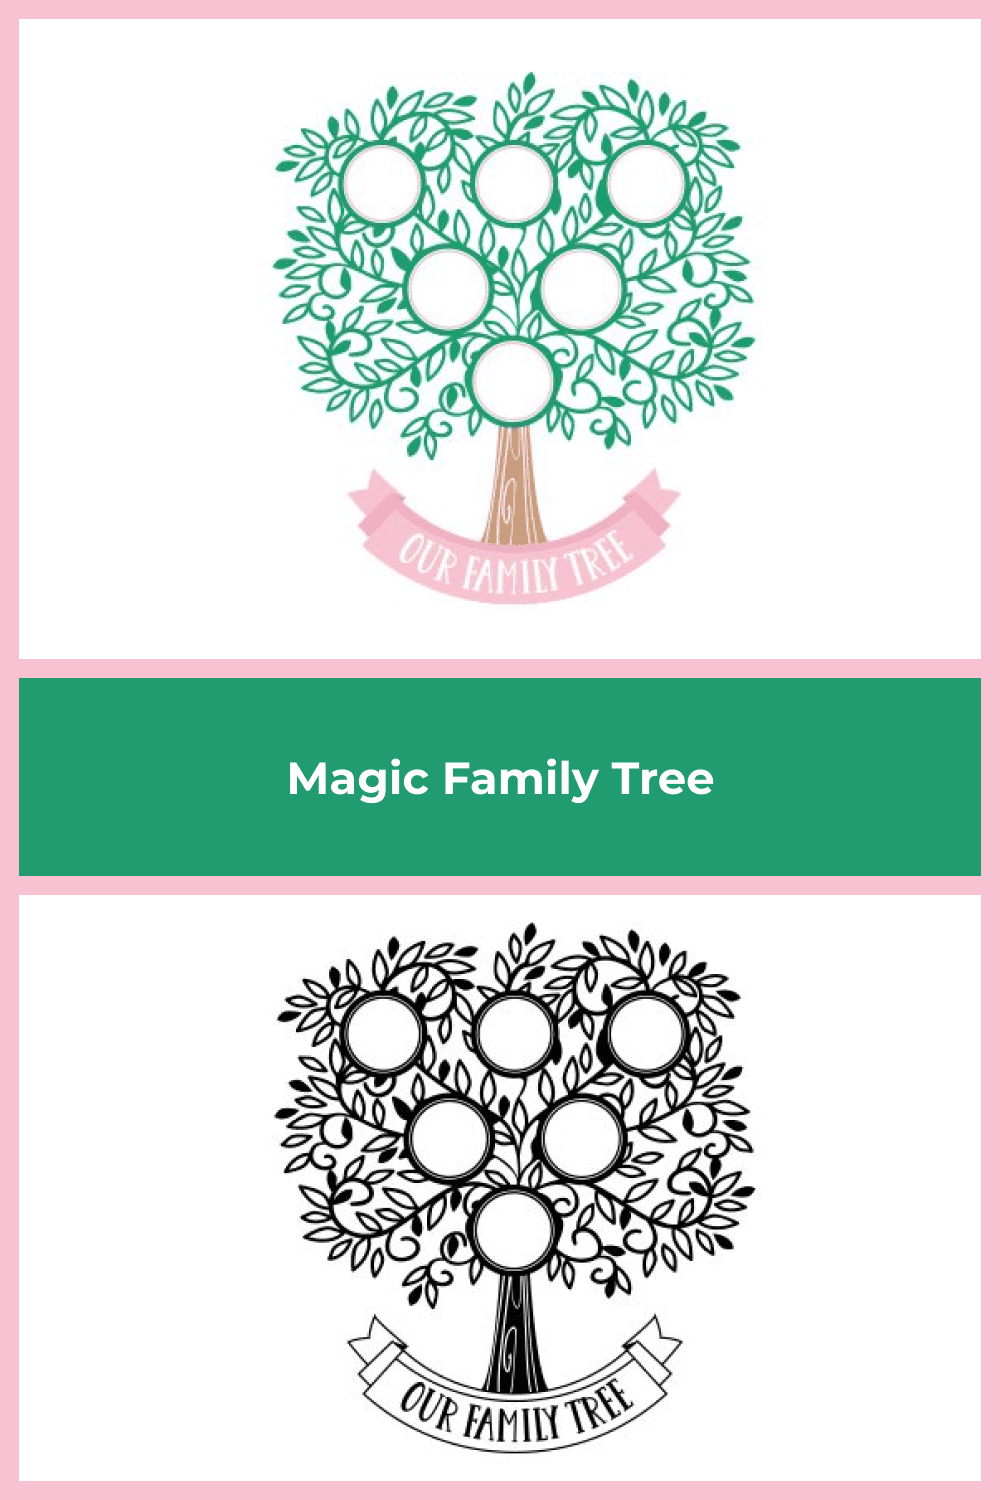 A laconic tree for a small family.